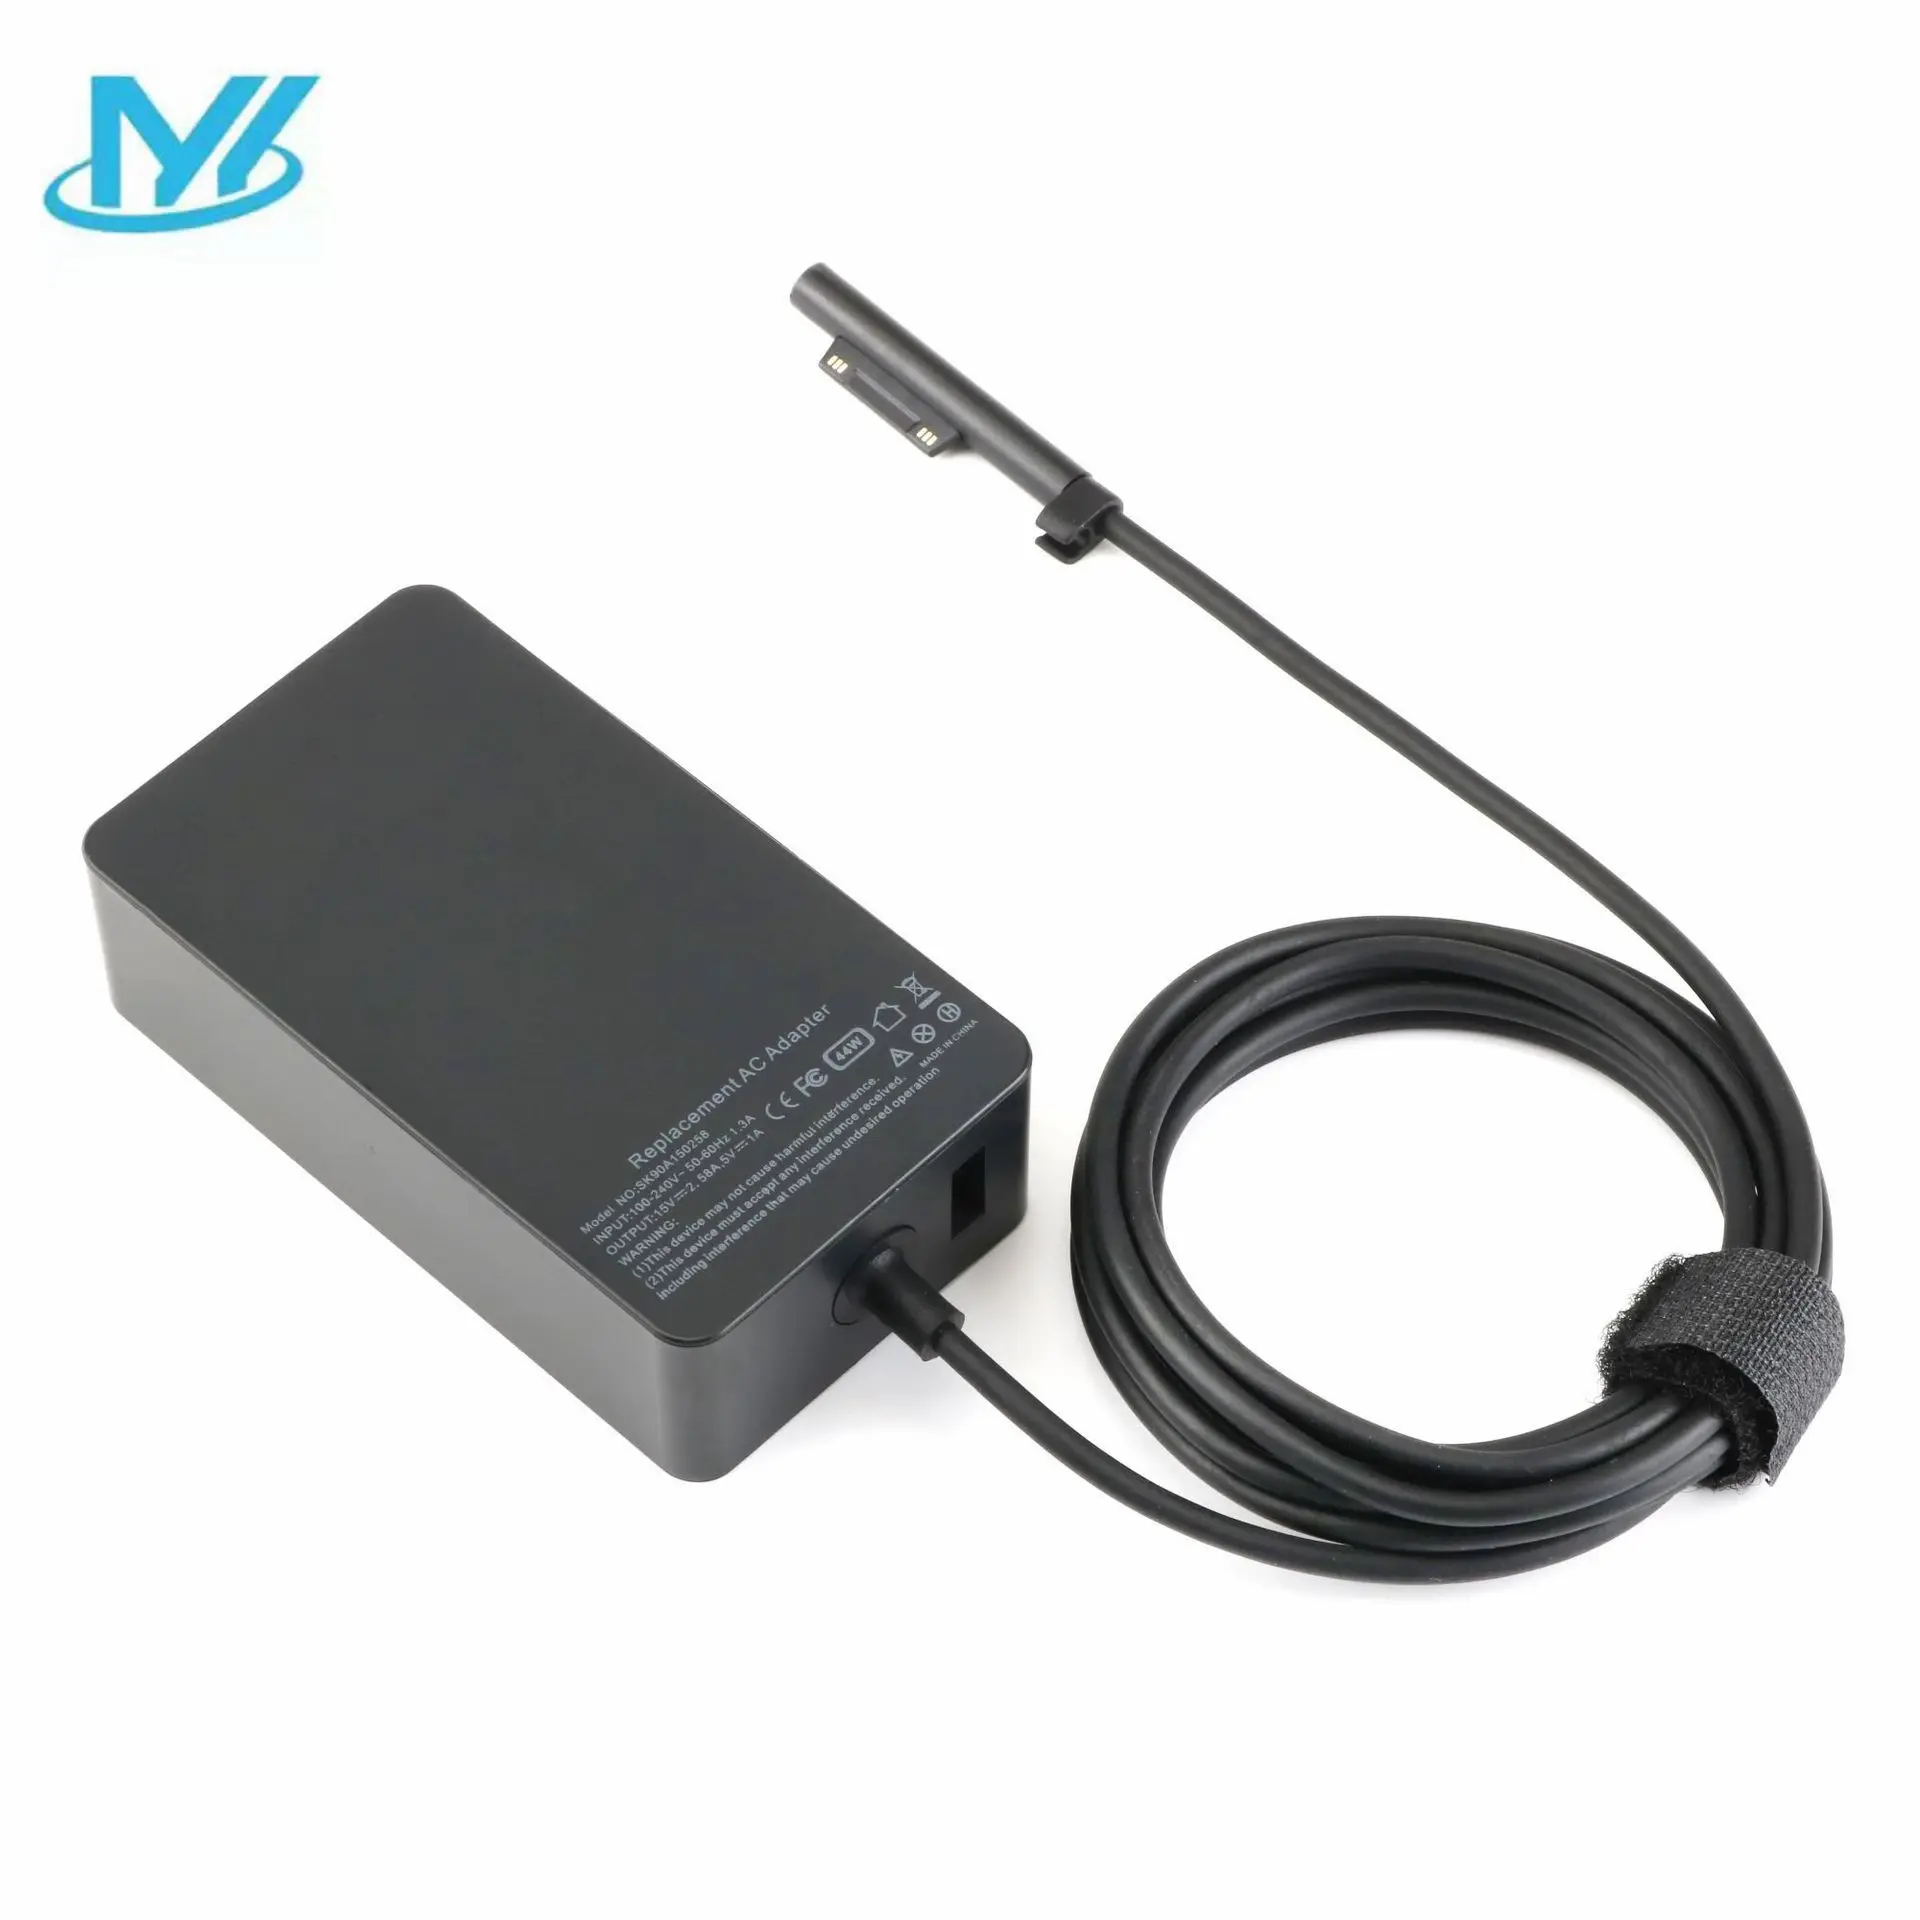 Power Adapter AC Adapter 44W 15V 2.58A Charger USB Port For Microsoft Surface Pro 5 Pro 4 Pro 3 Laptop 15V 2.58A